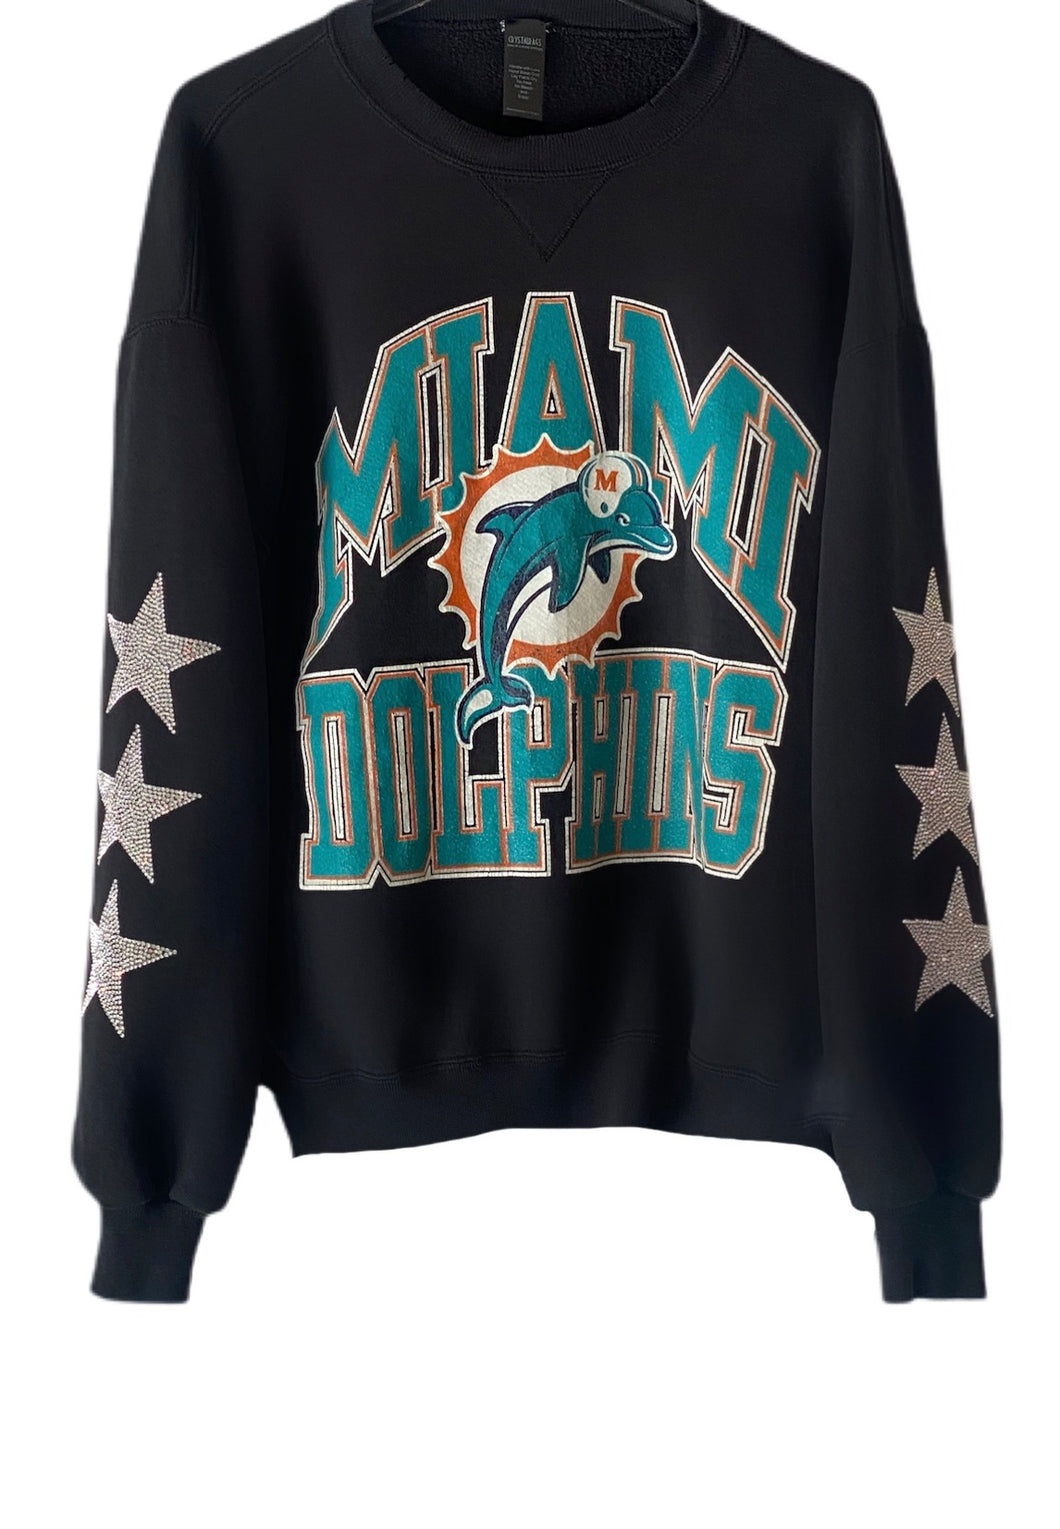 Miami Dolphins, NFL One of a KIND Vintage Sweatshirt with Three Crystal Star Design, Custom Name & Number